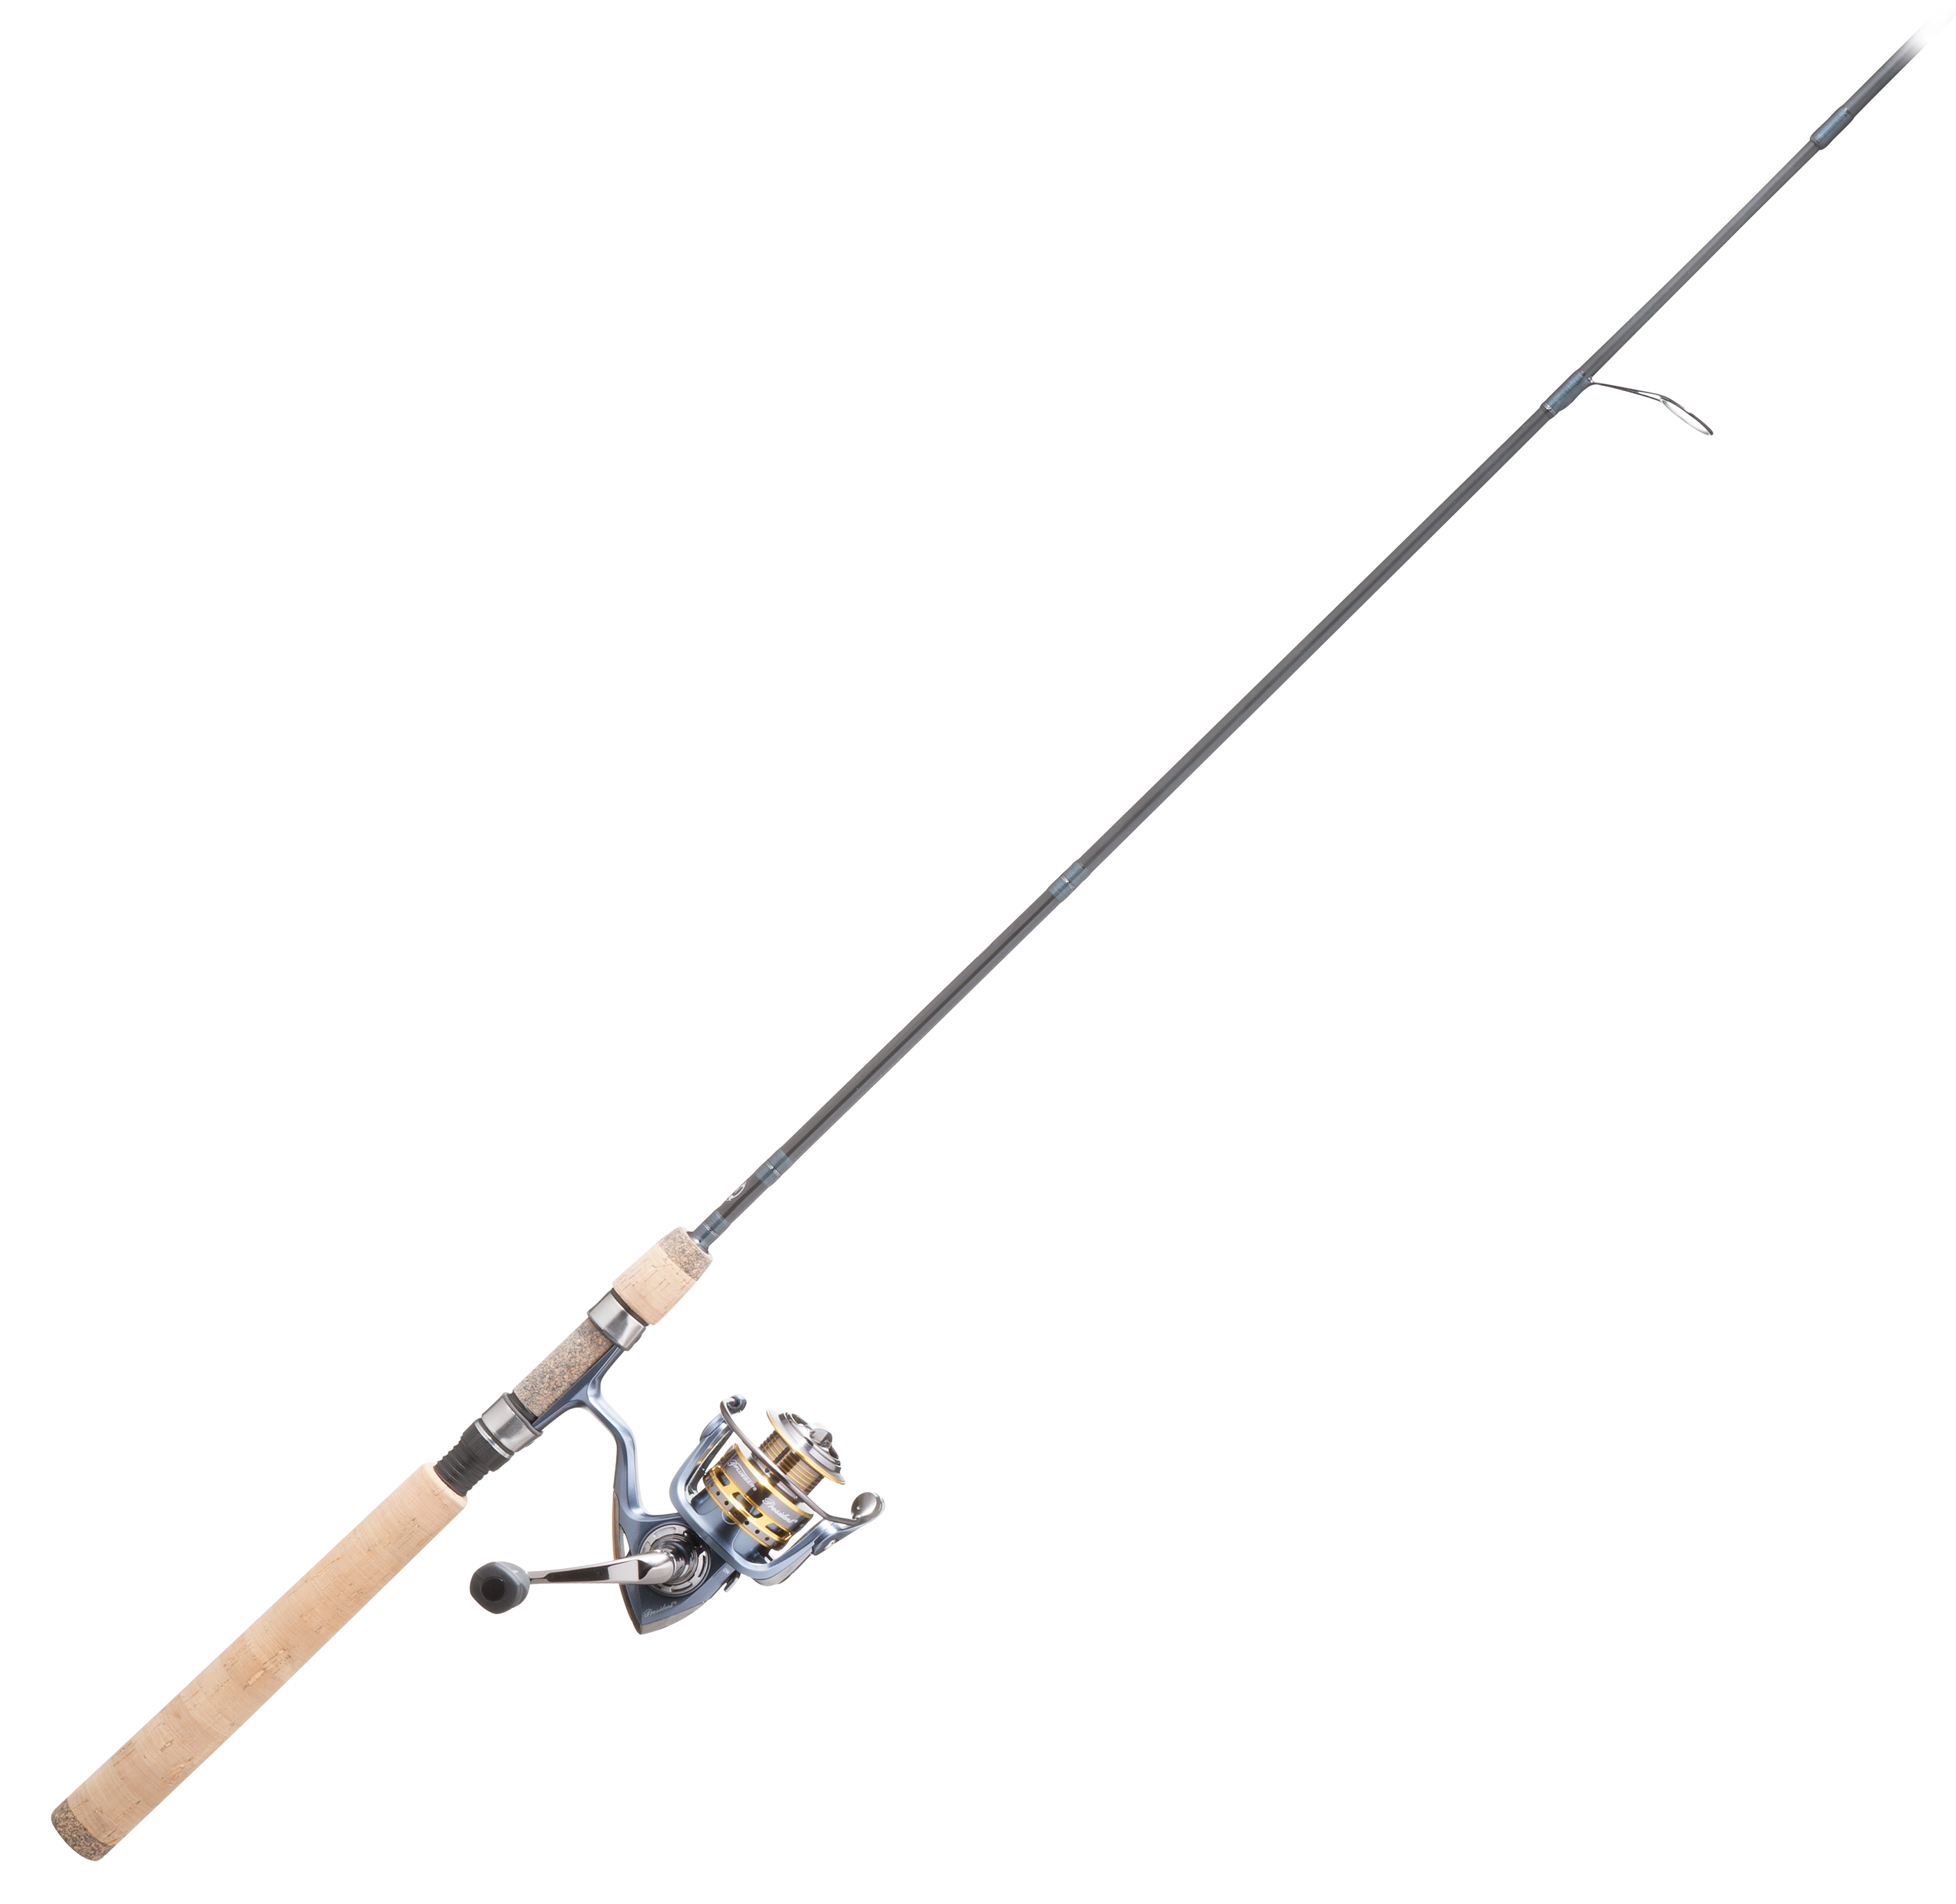 Pflueger President/Bass Pro Shops Micro Lite Spinning Rod and Reel Combo - Model PRESSP25X/MIL66MS-4